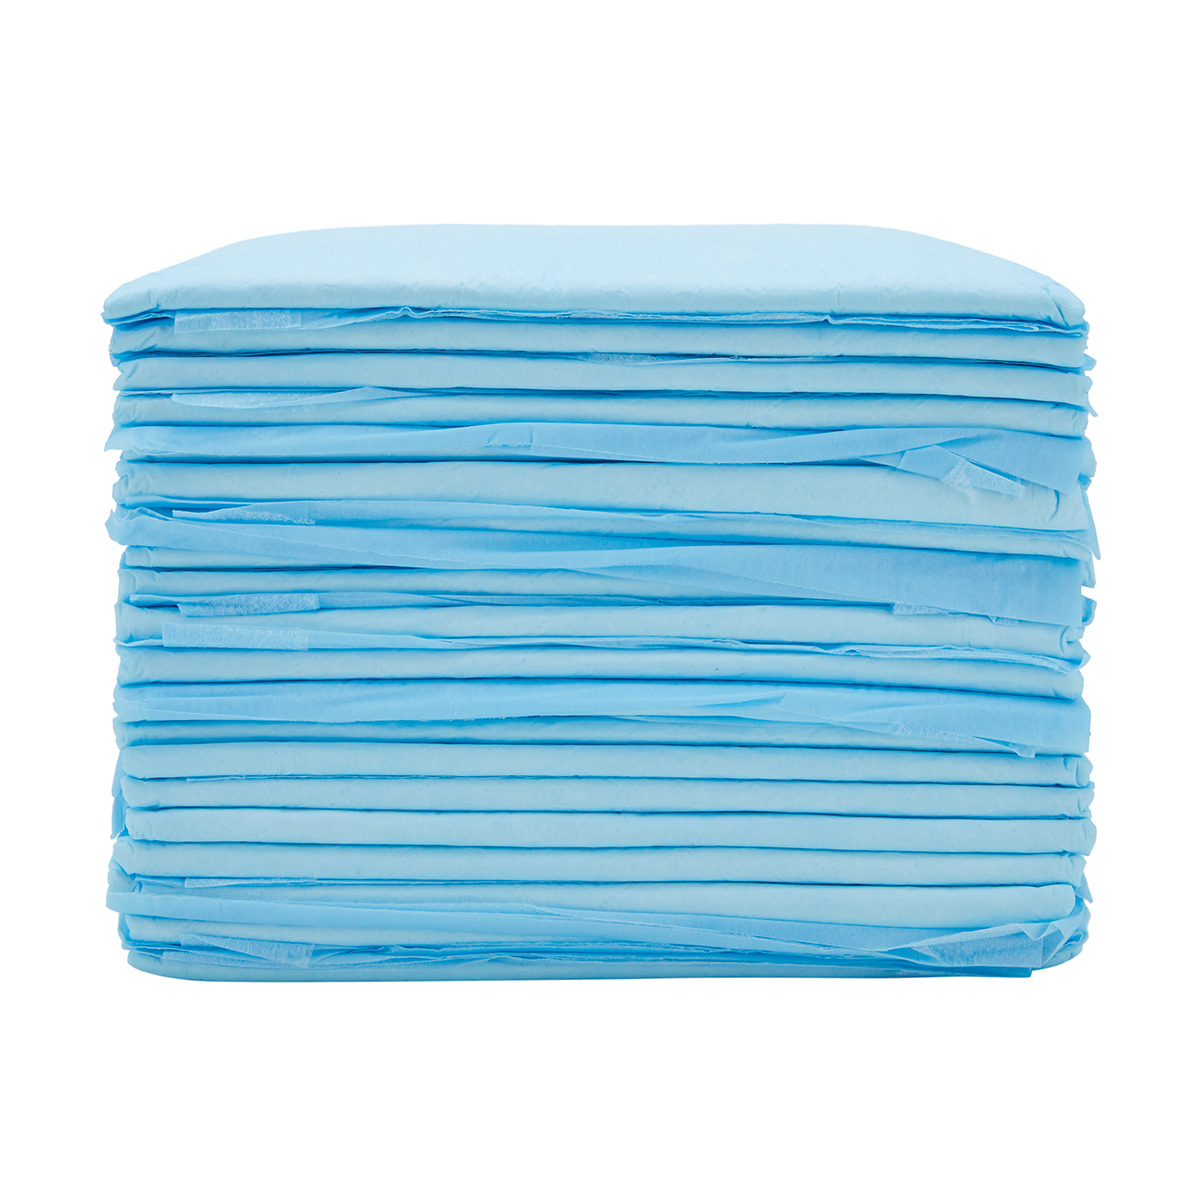 Puppy Training Pads - Pack of 20 | Kmart